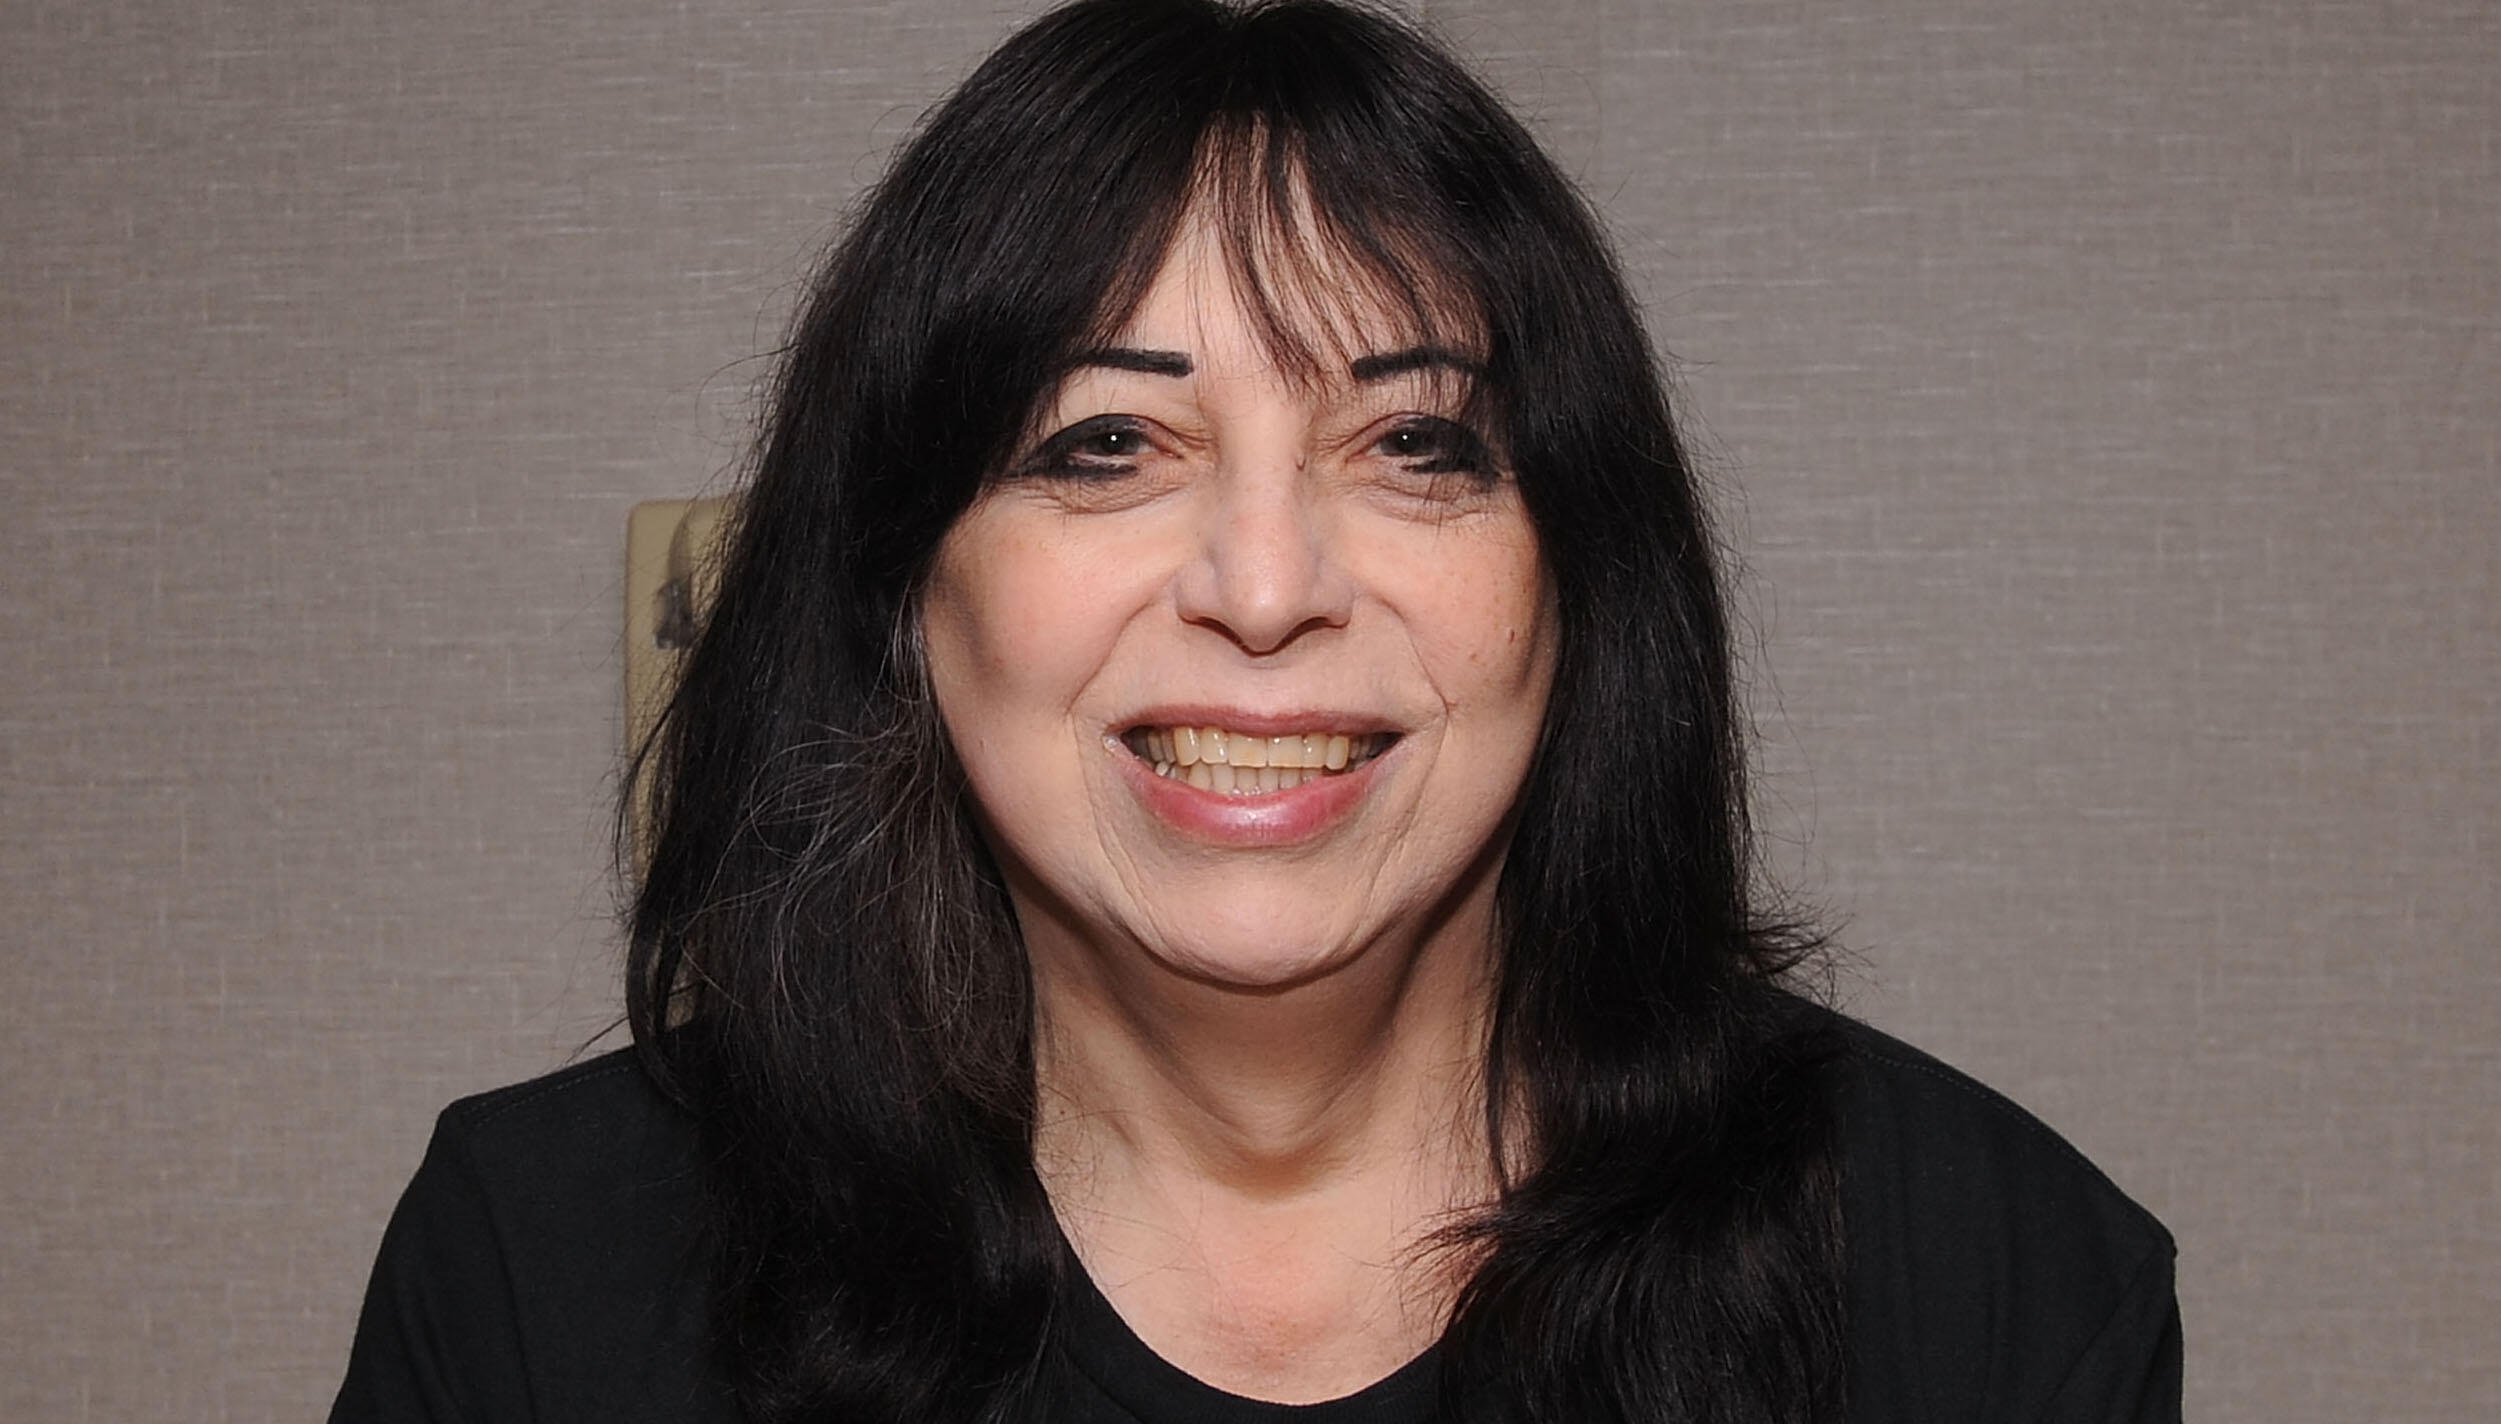 Has Egypt everyone? Vinnie Vincent charges fans $200 to stay in his Facebook group